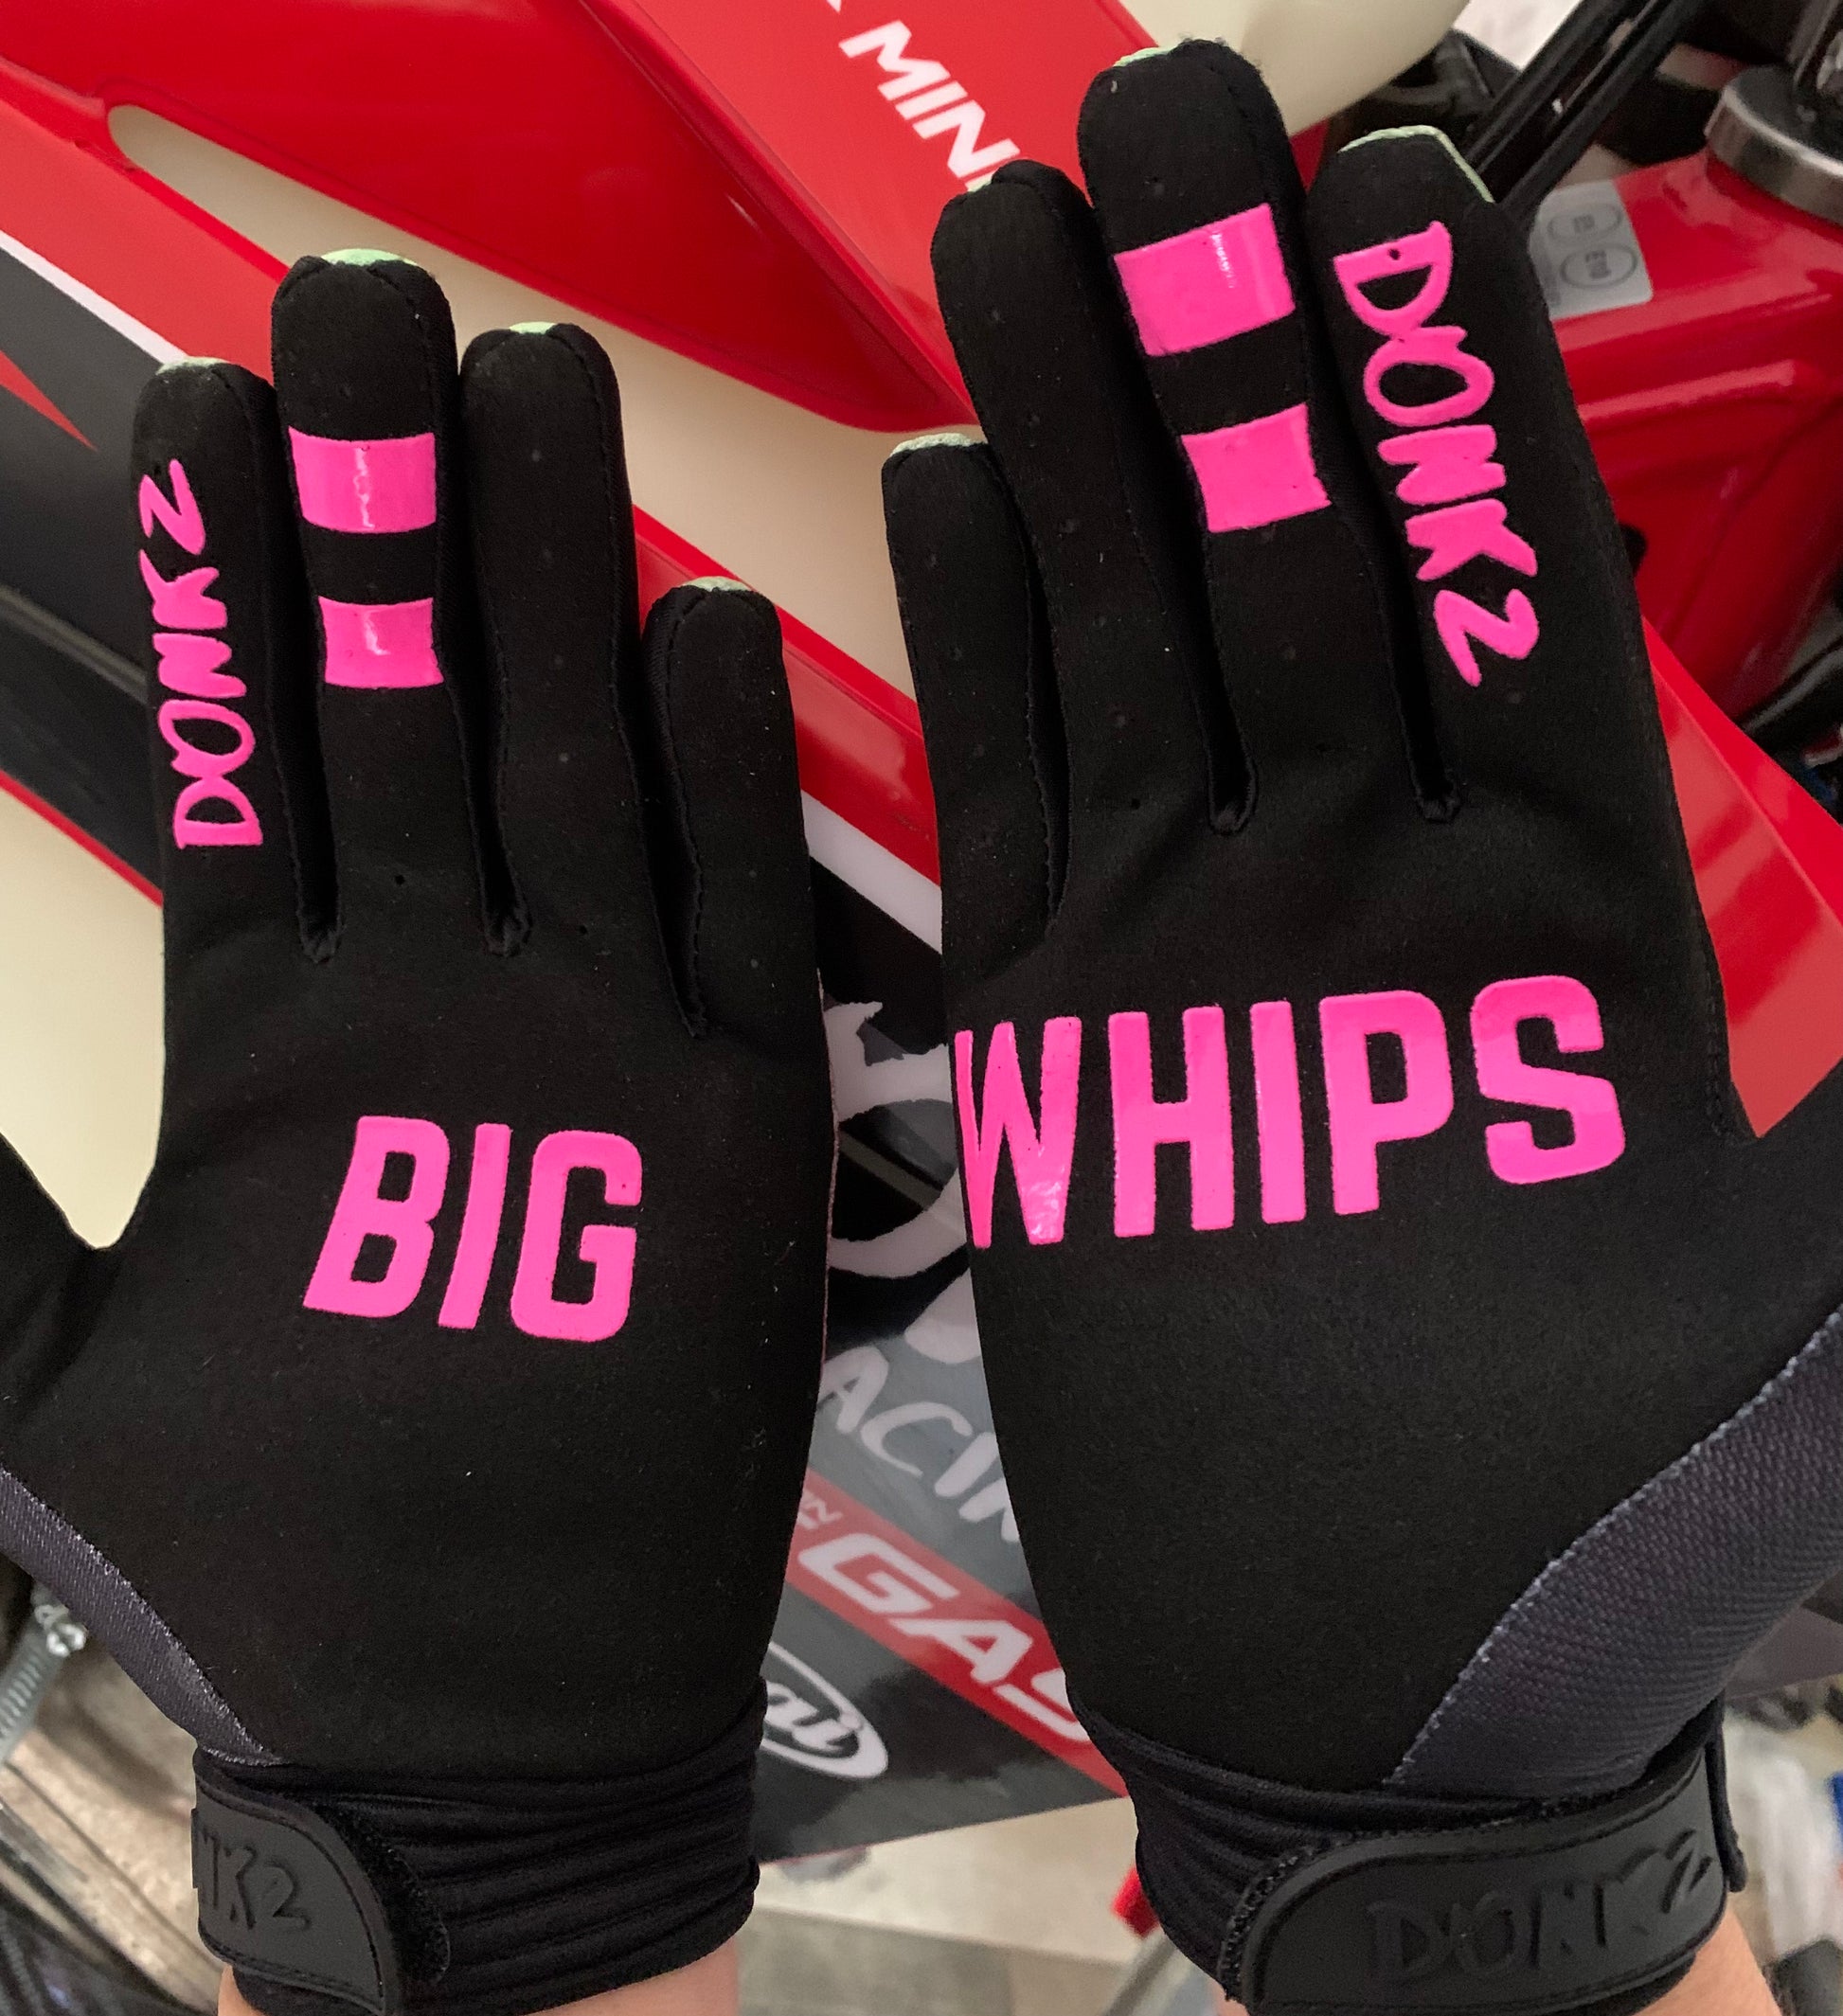 Palm of gloves with Big Whips print in pink